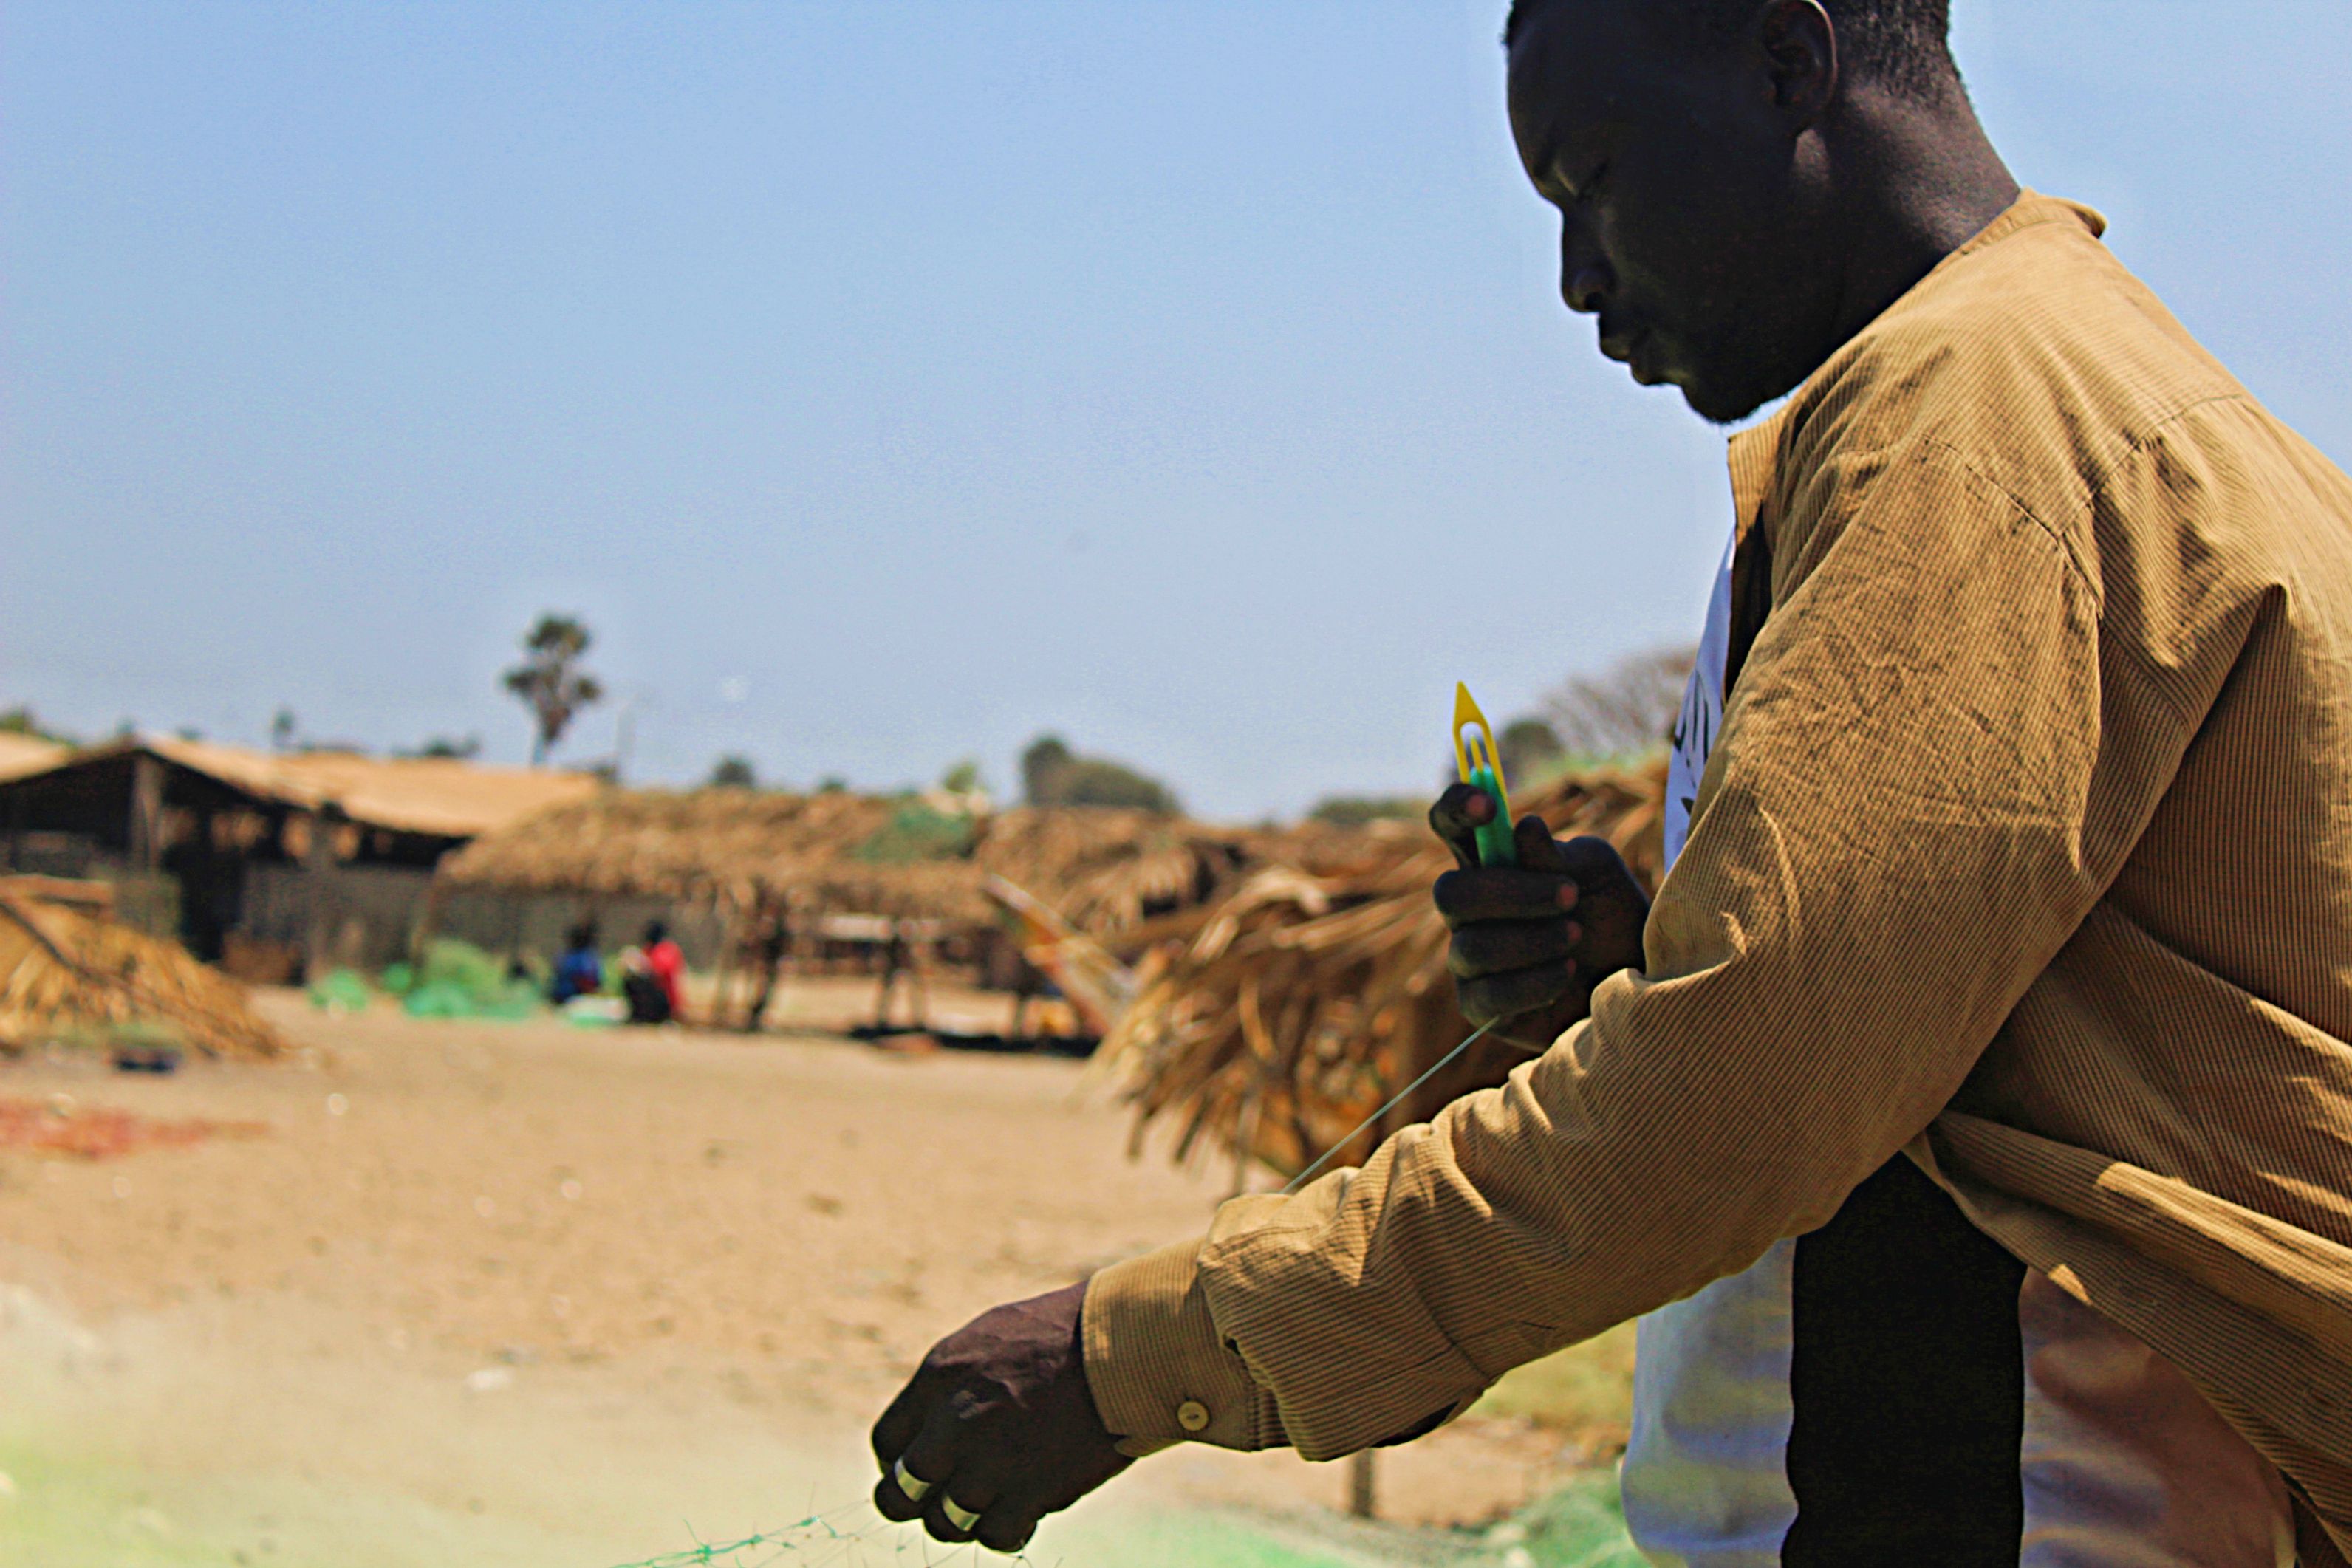 Edrissa Sackh and his captain Abdulai Camara mend their fishing net on Gunjur beach. These small-scale fishermen catch the majority of fish critical to food security. Image by Nosmot Gbadamosi. Gambia, 2018.